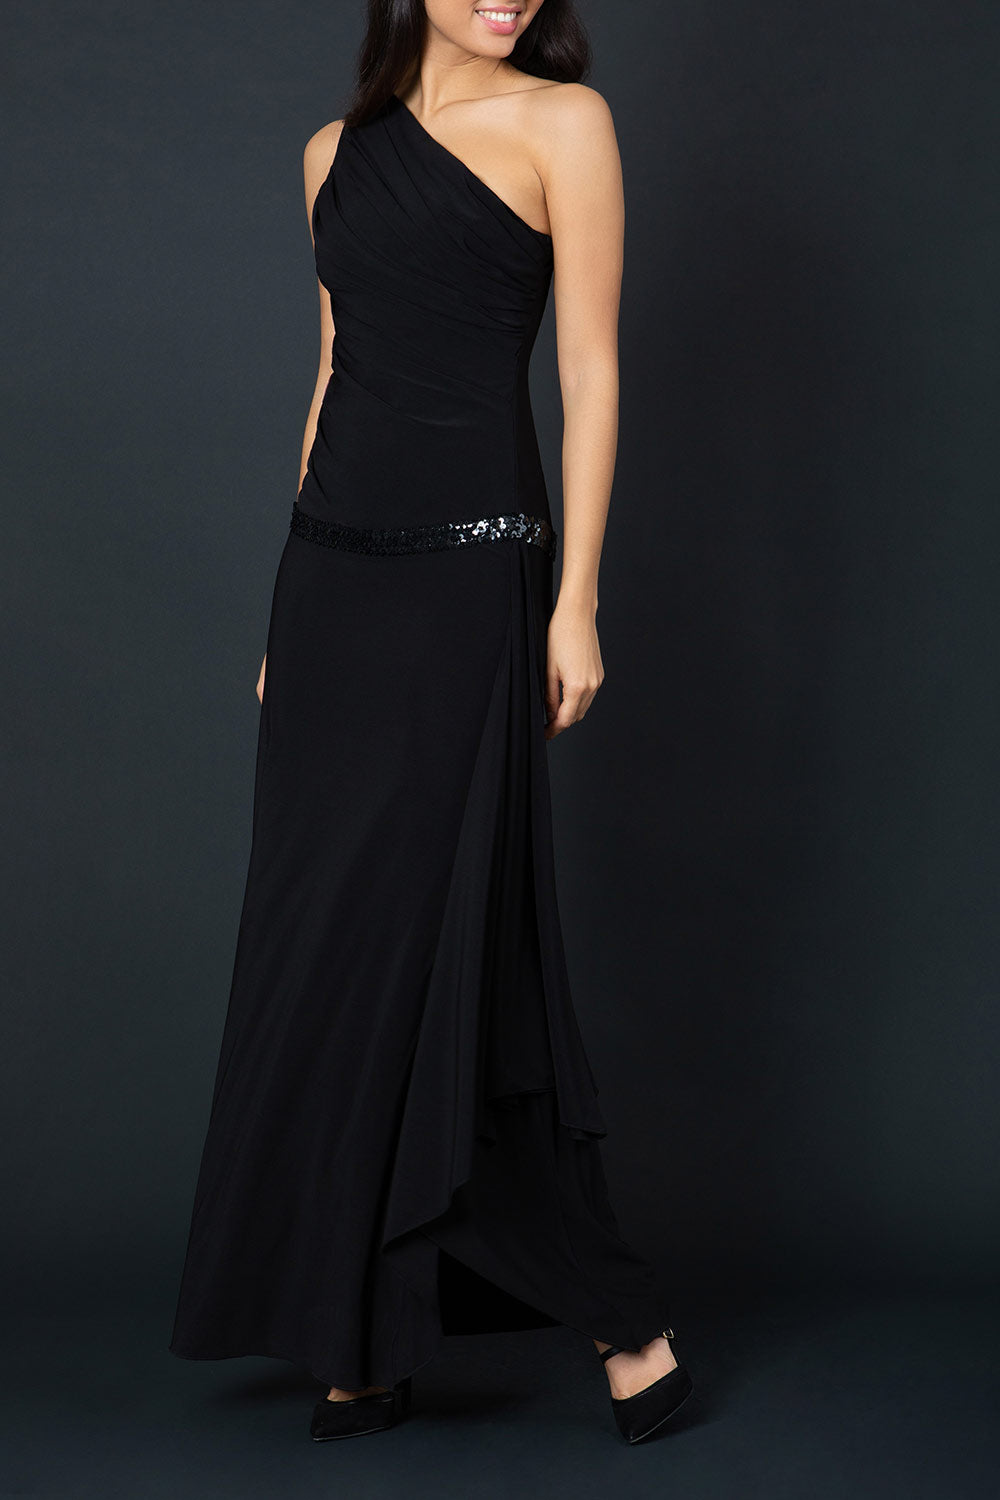 Model wearing Temptress Full length Sleeveless Asymmetric One shoulder A-line Swing dress with sparkling band detail across the waist area in black front